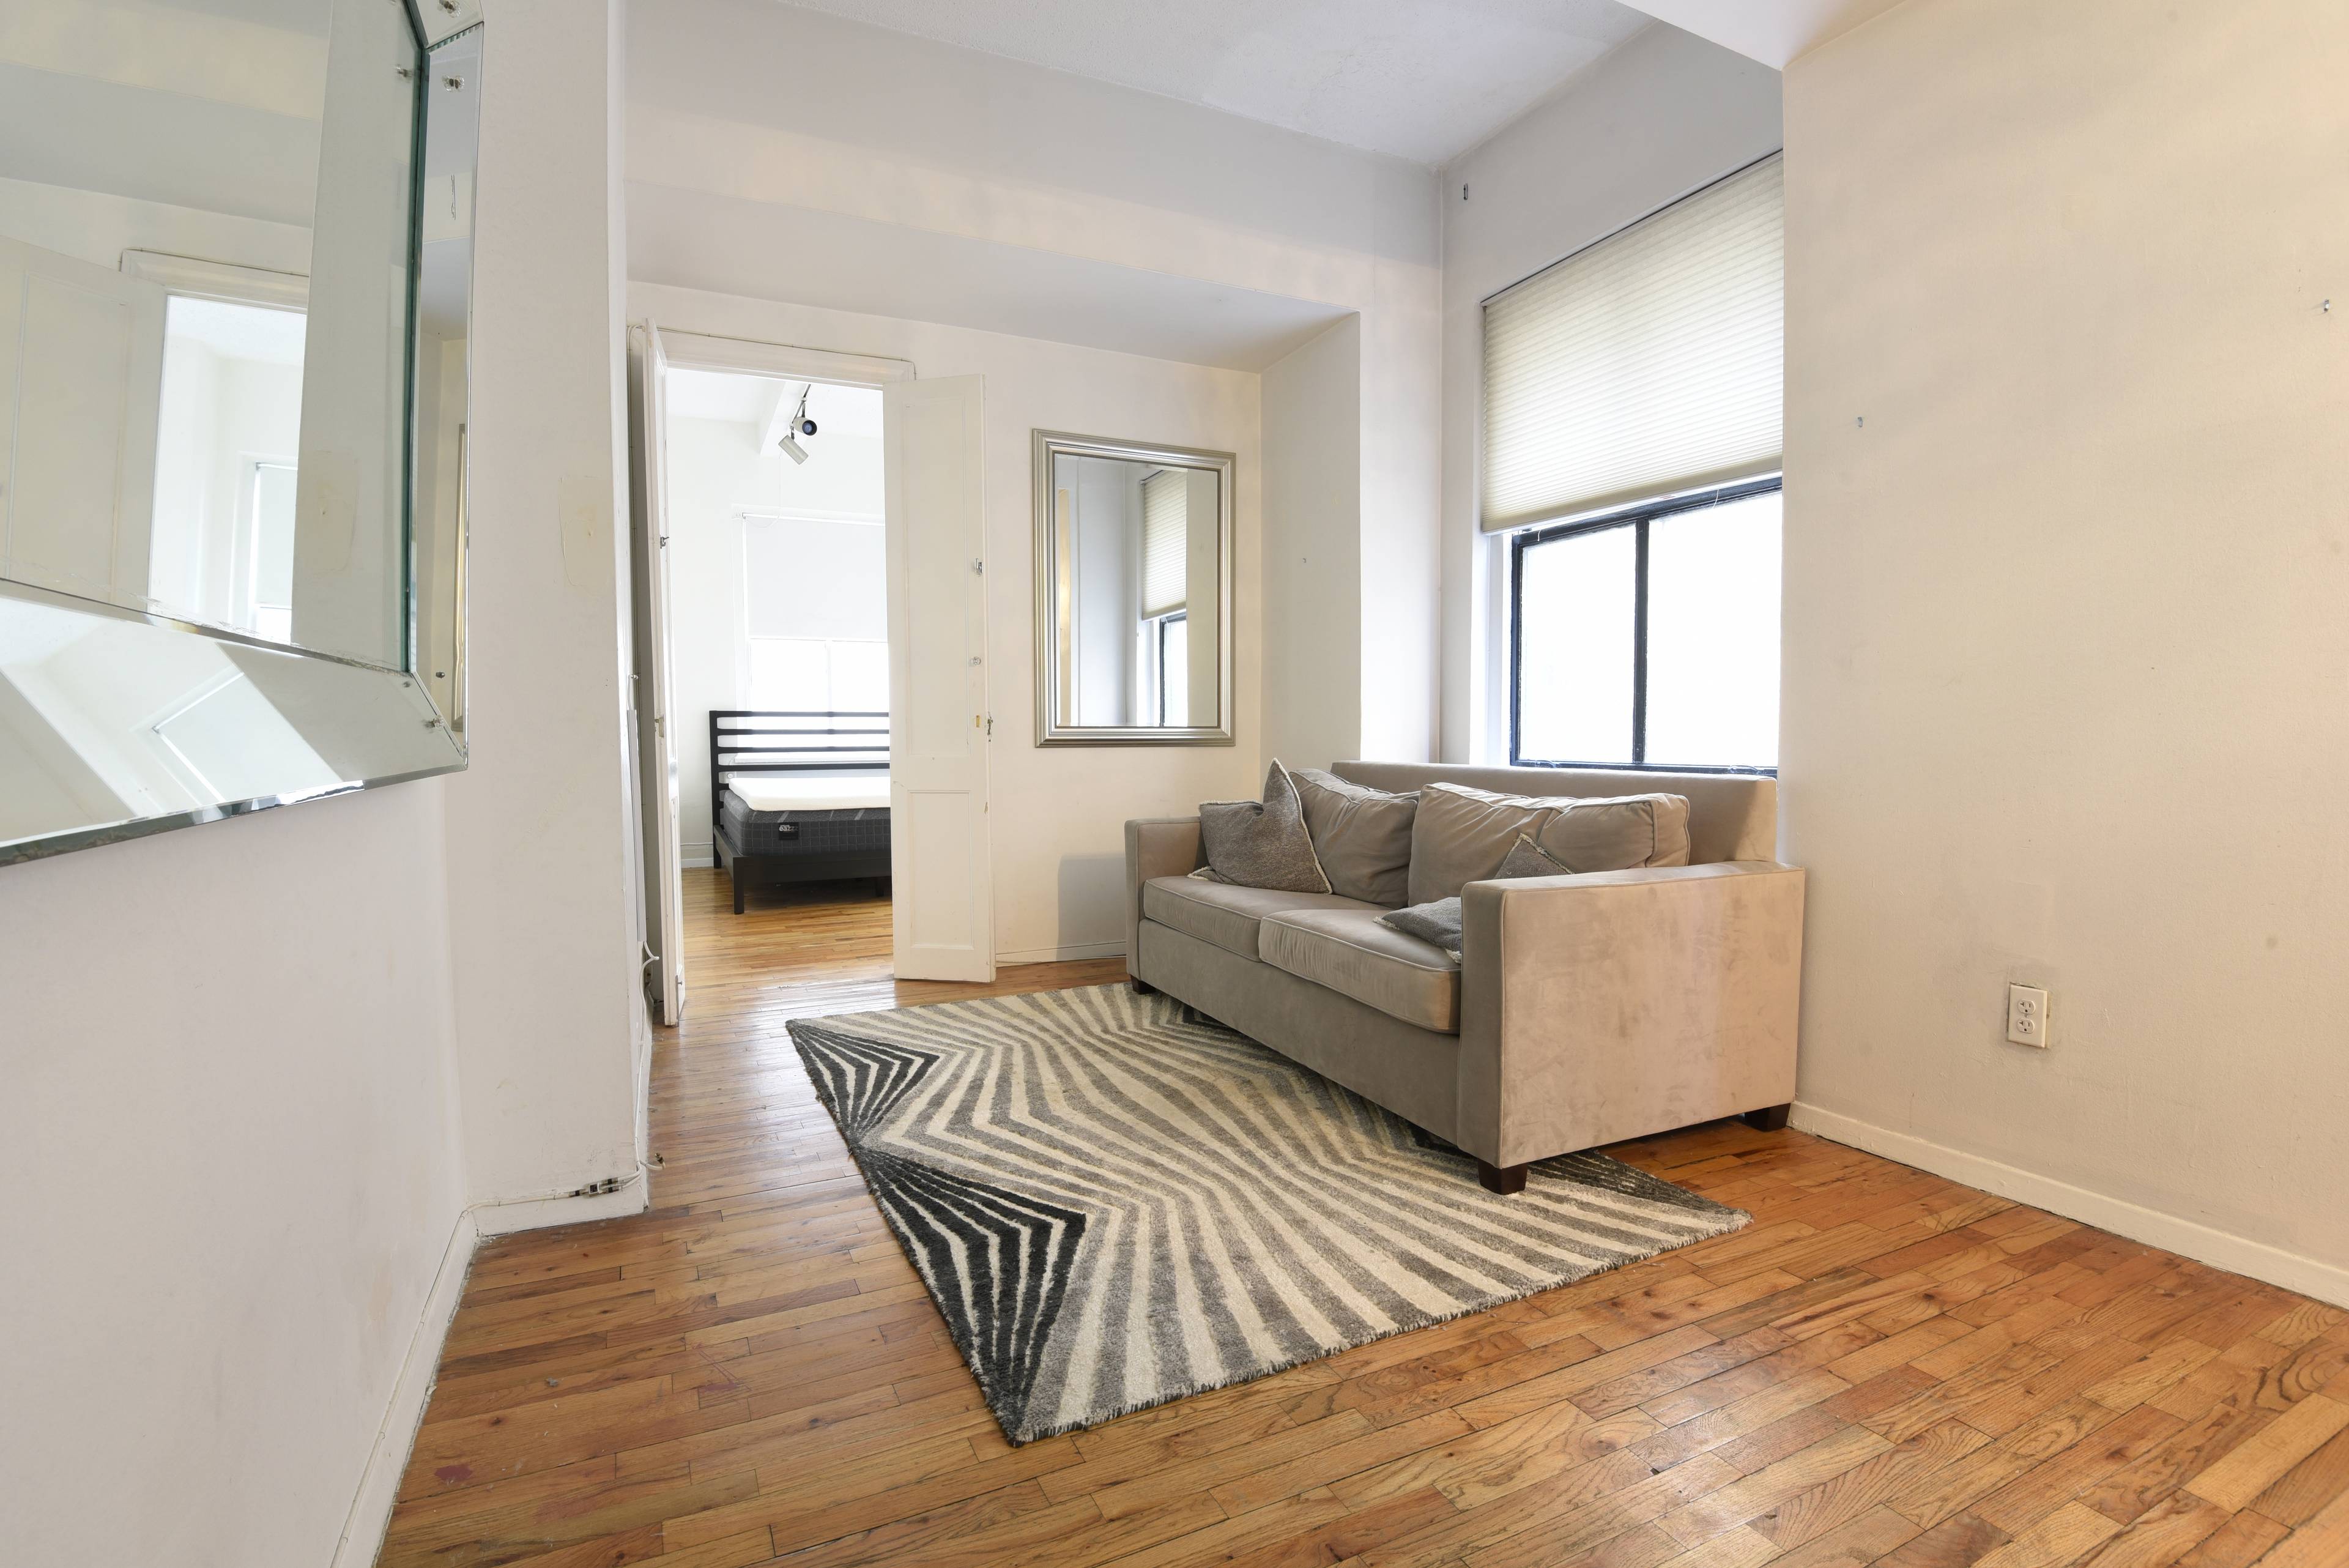 Our thoughts... This is an amazing opportunity to live in this spacious and bright renovated contemporary one bedroom at Sage House on Lexington Avenue right in the heart of Gramercy ...